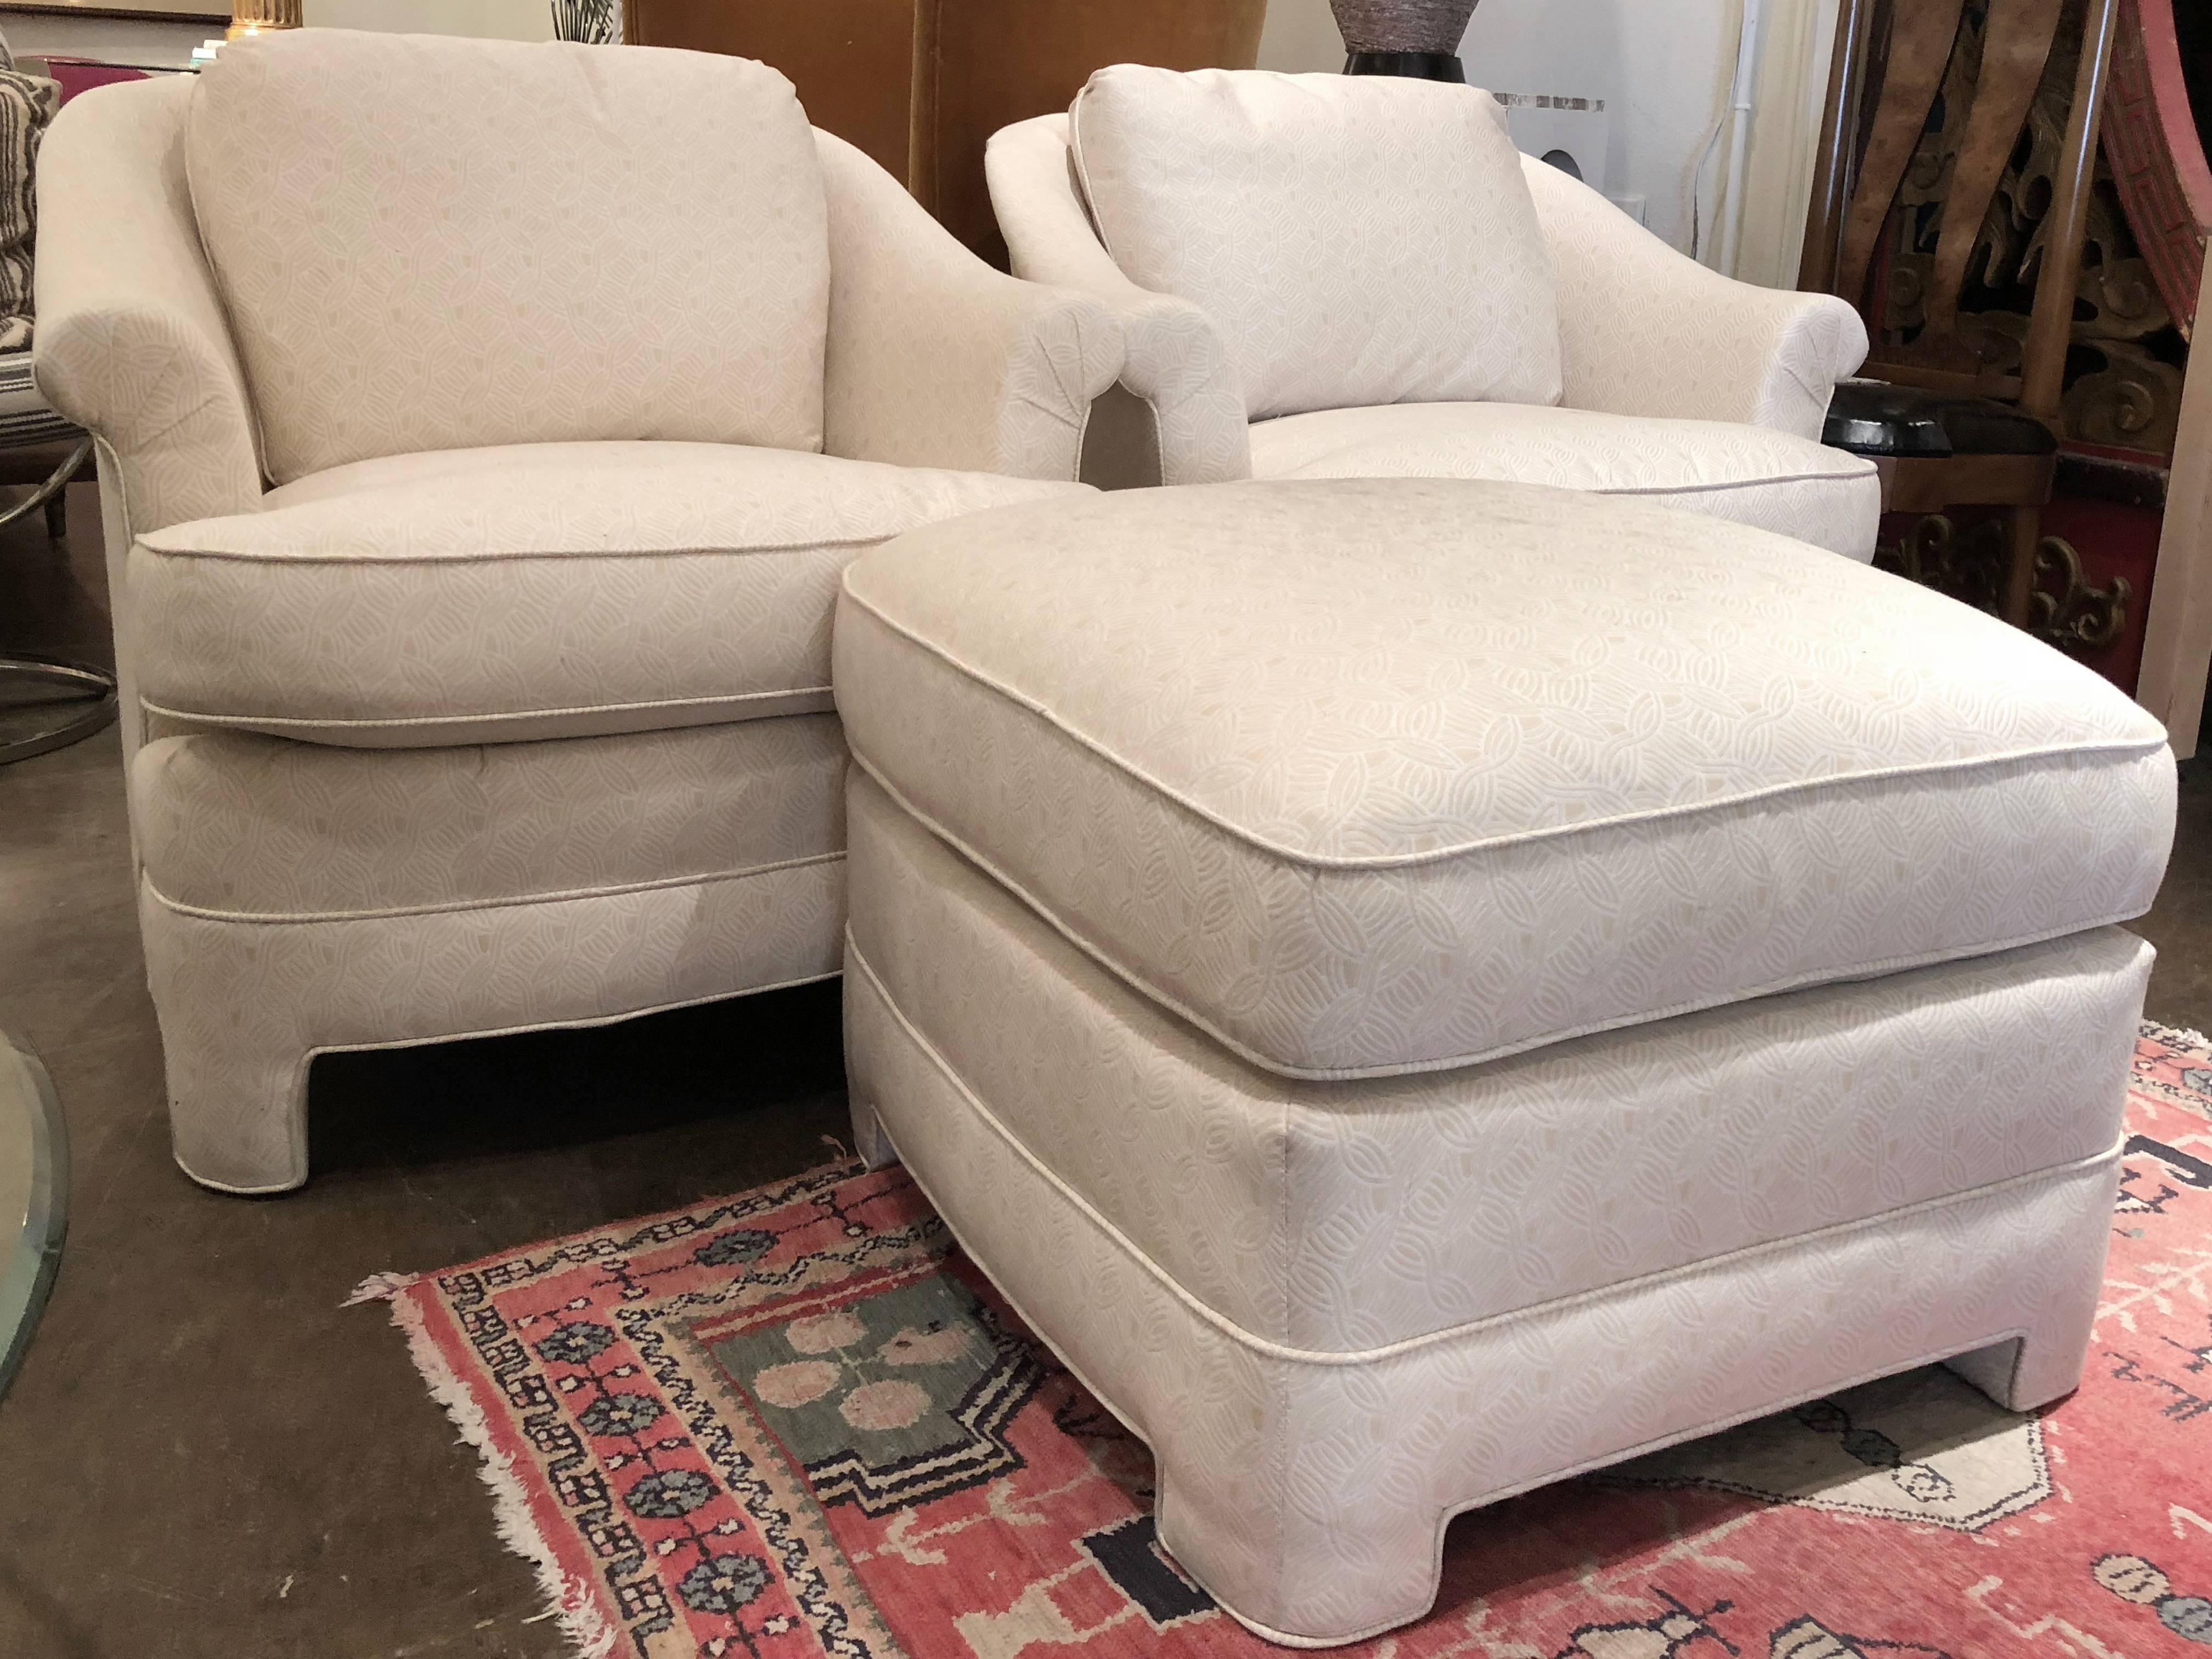 Pair of Henredon Asian influenced armchairs and ottoman. Newly upholstered in textured fabric. circa 1980s

dimensions: 32